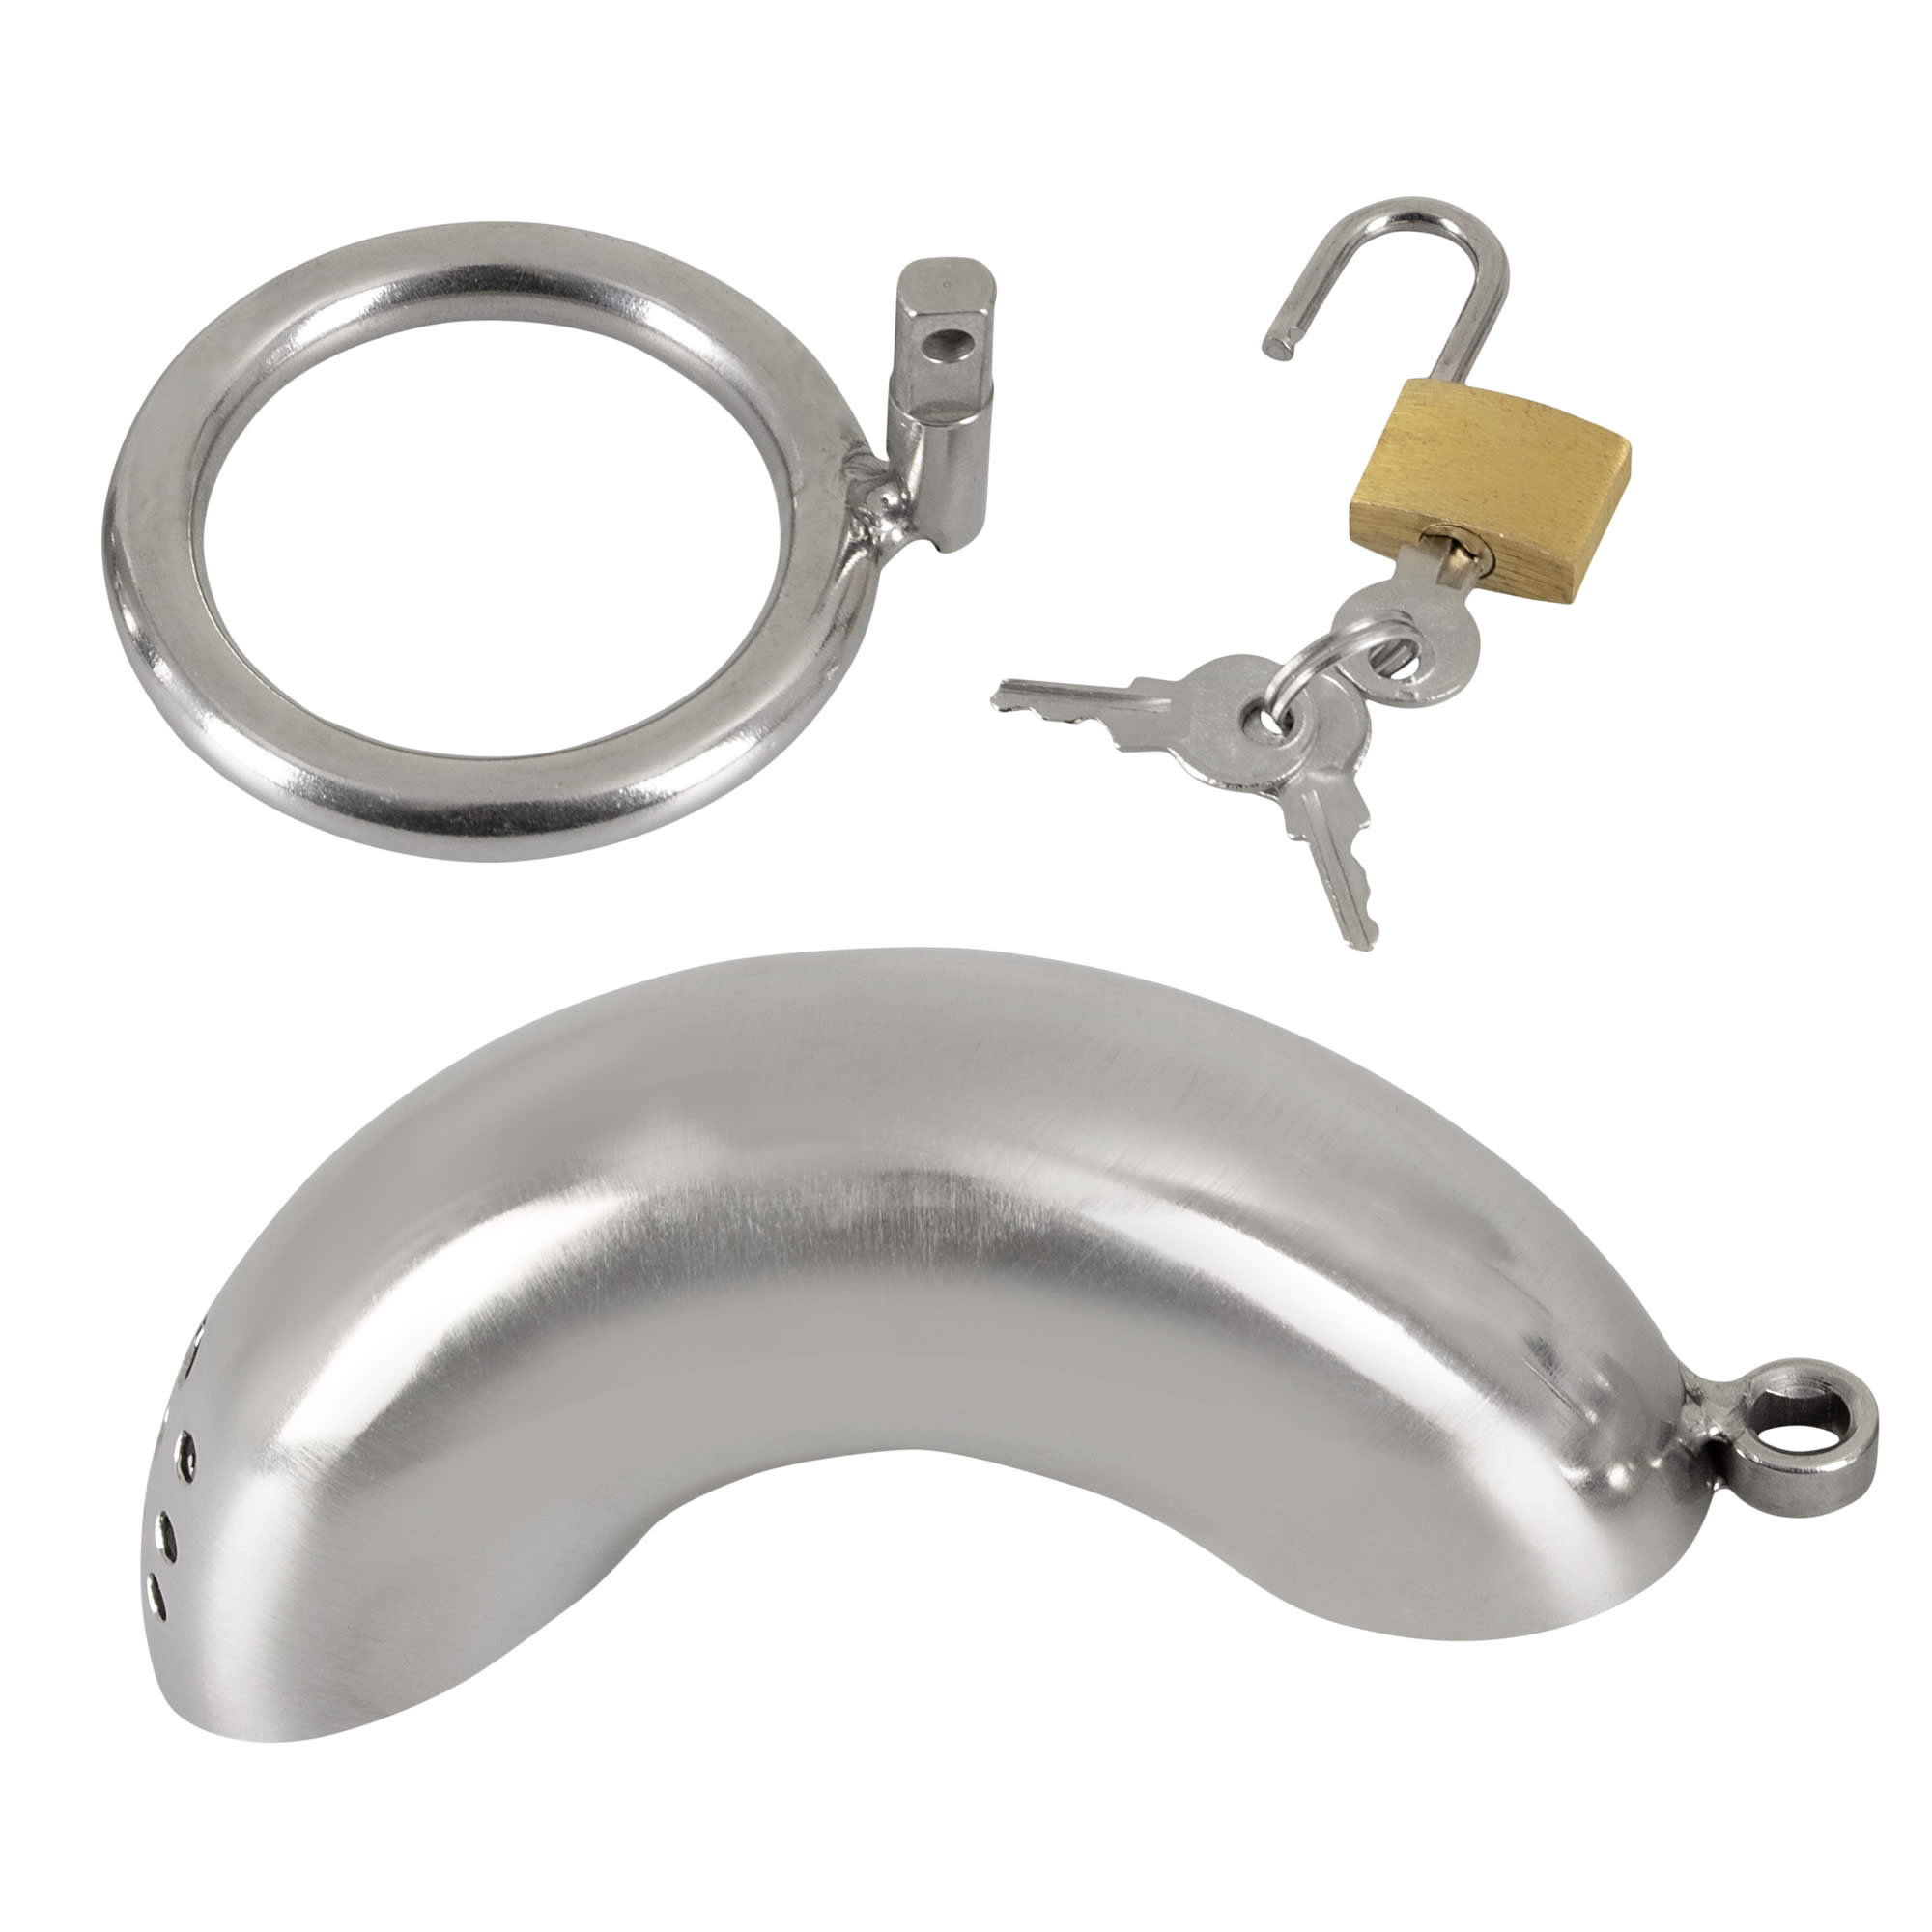 Peniskfig Chastity Cage Long aus Edelstahl